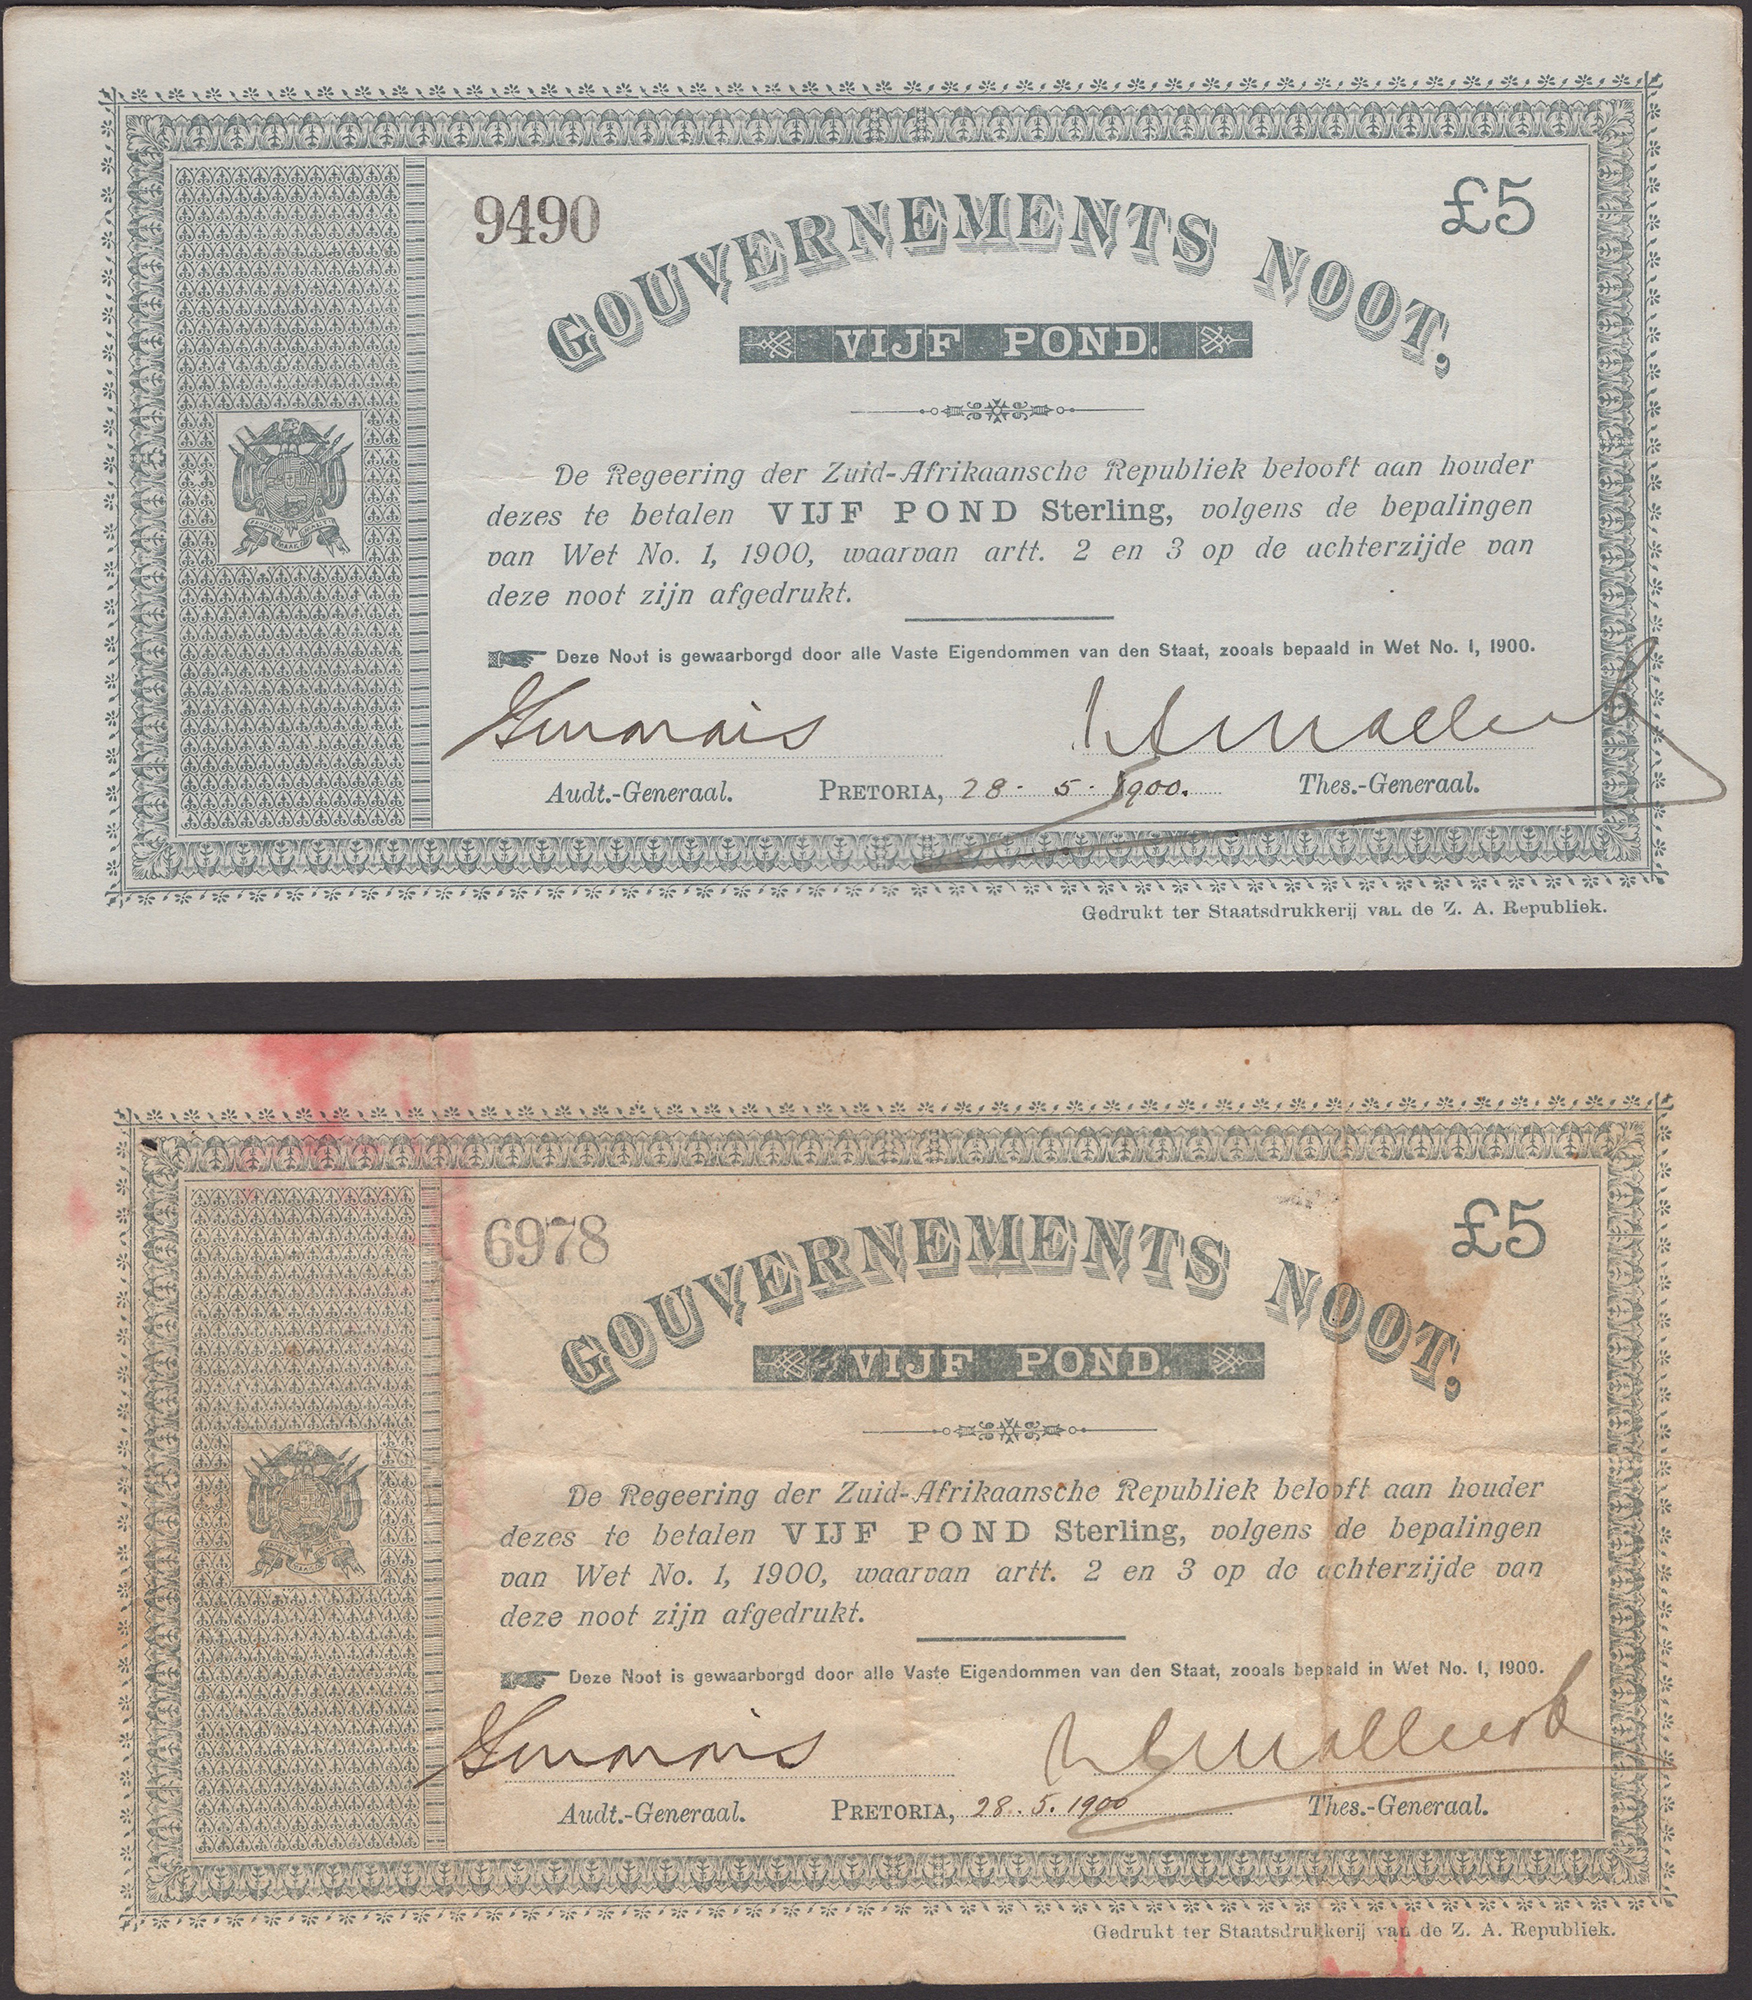 Gouvernements Noots, Â£5 (2), 28 May 1900, serial numbers 6978 and 9490, nice original paper,...